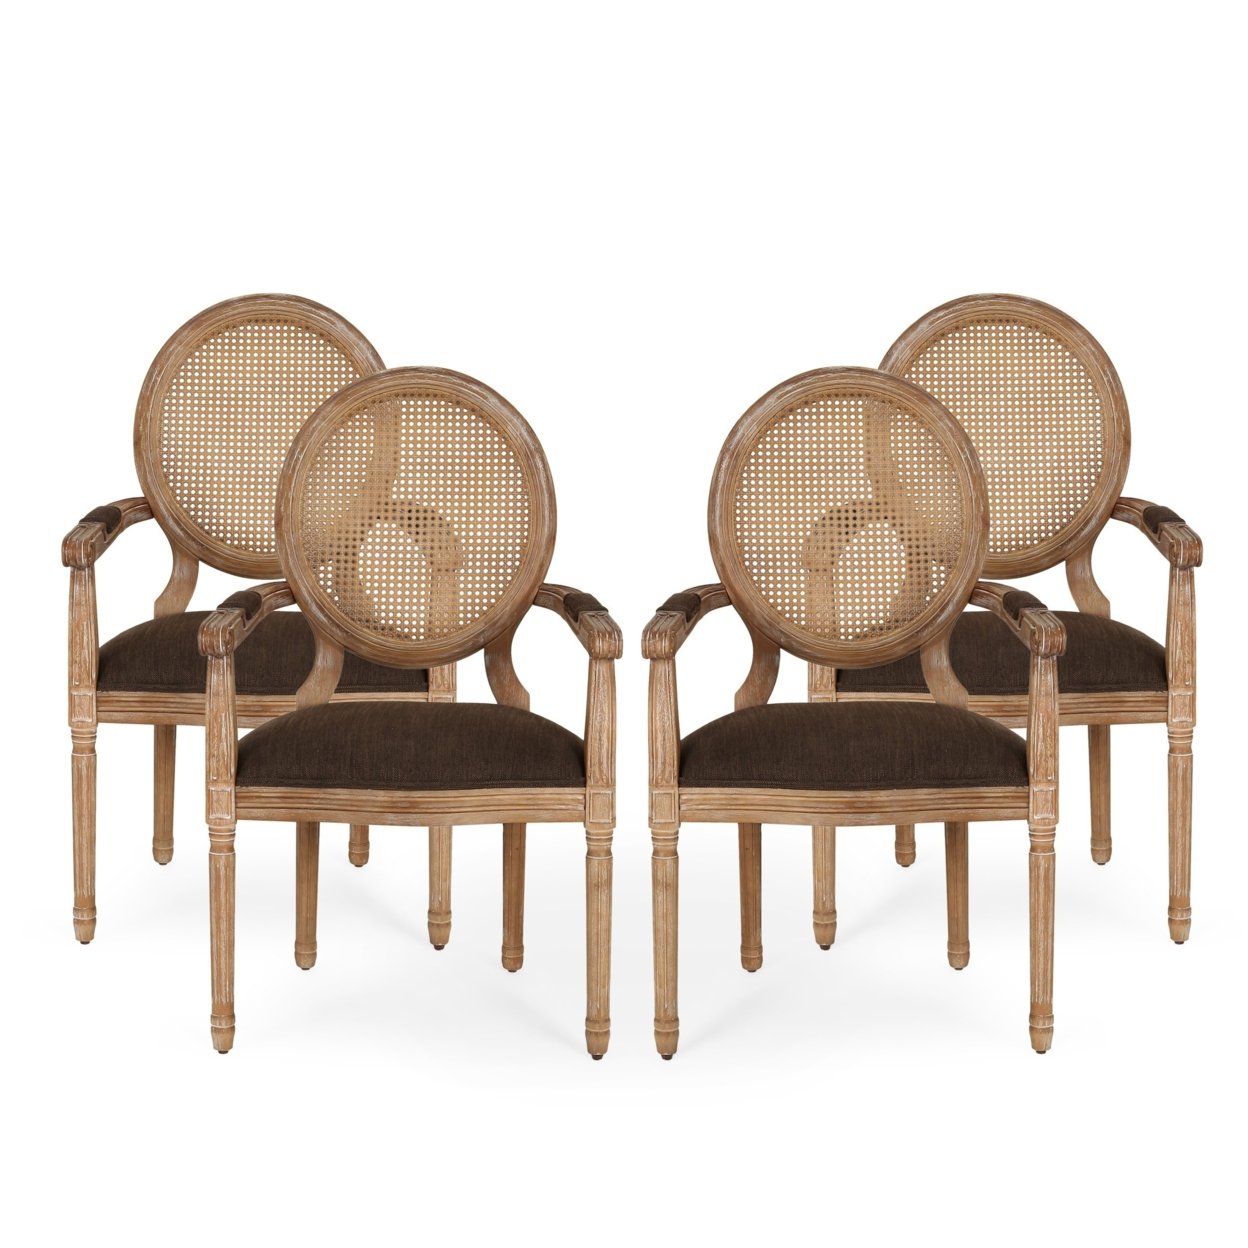 Aisenbrey French Country Wood And Cane Upholstered Dining Chair - Natural/brown, Set Of 4